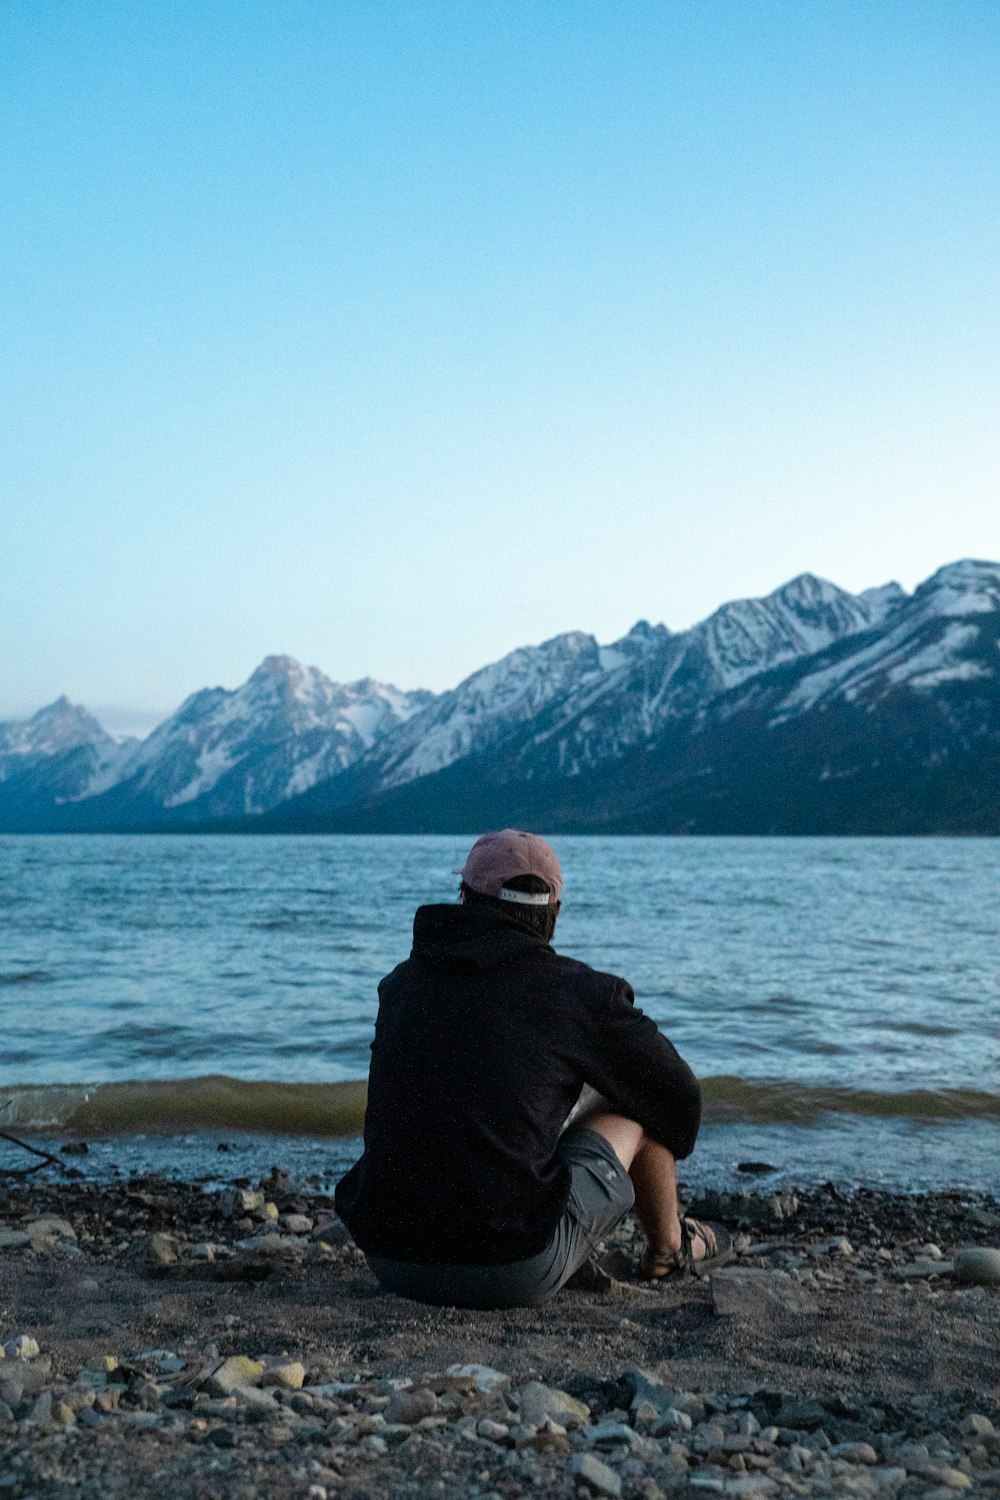 man in black hoodie sitting on rock near body of water and mountains during daytime